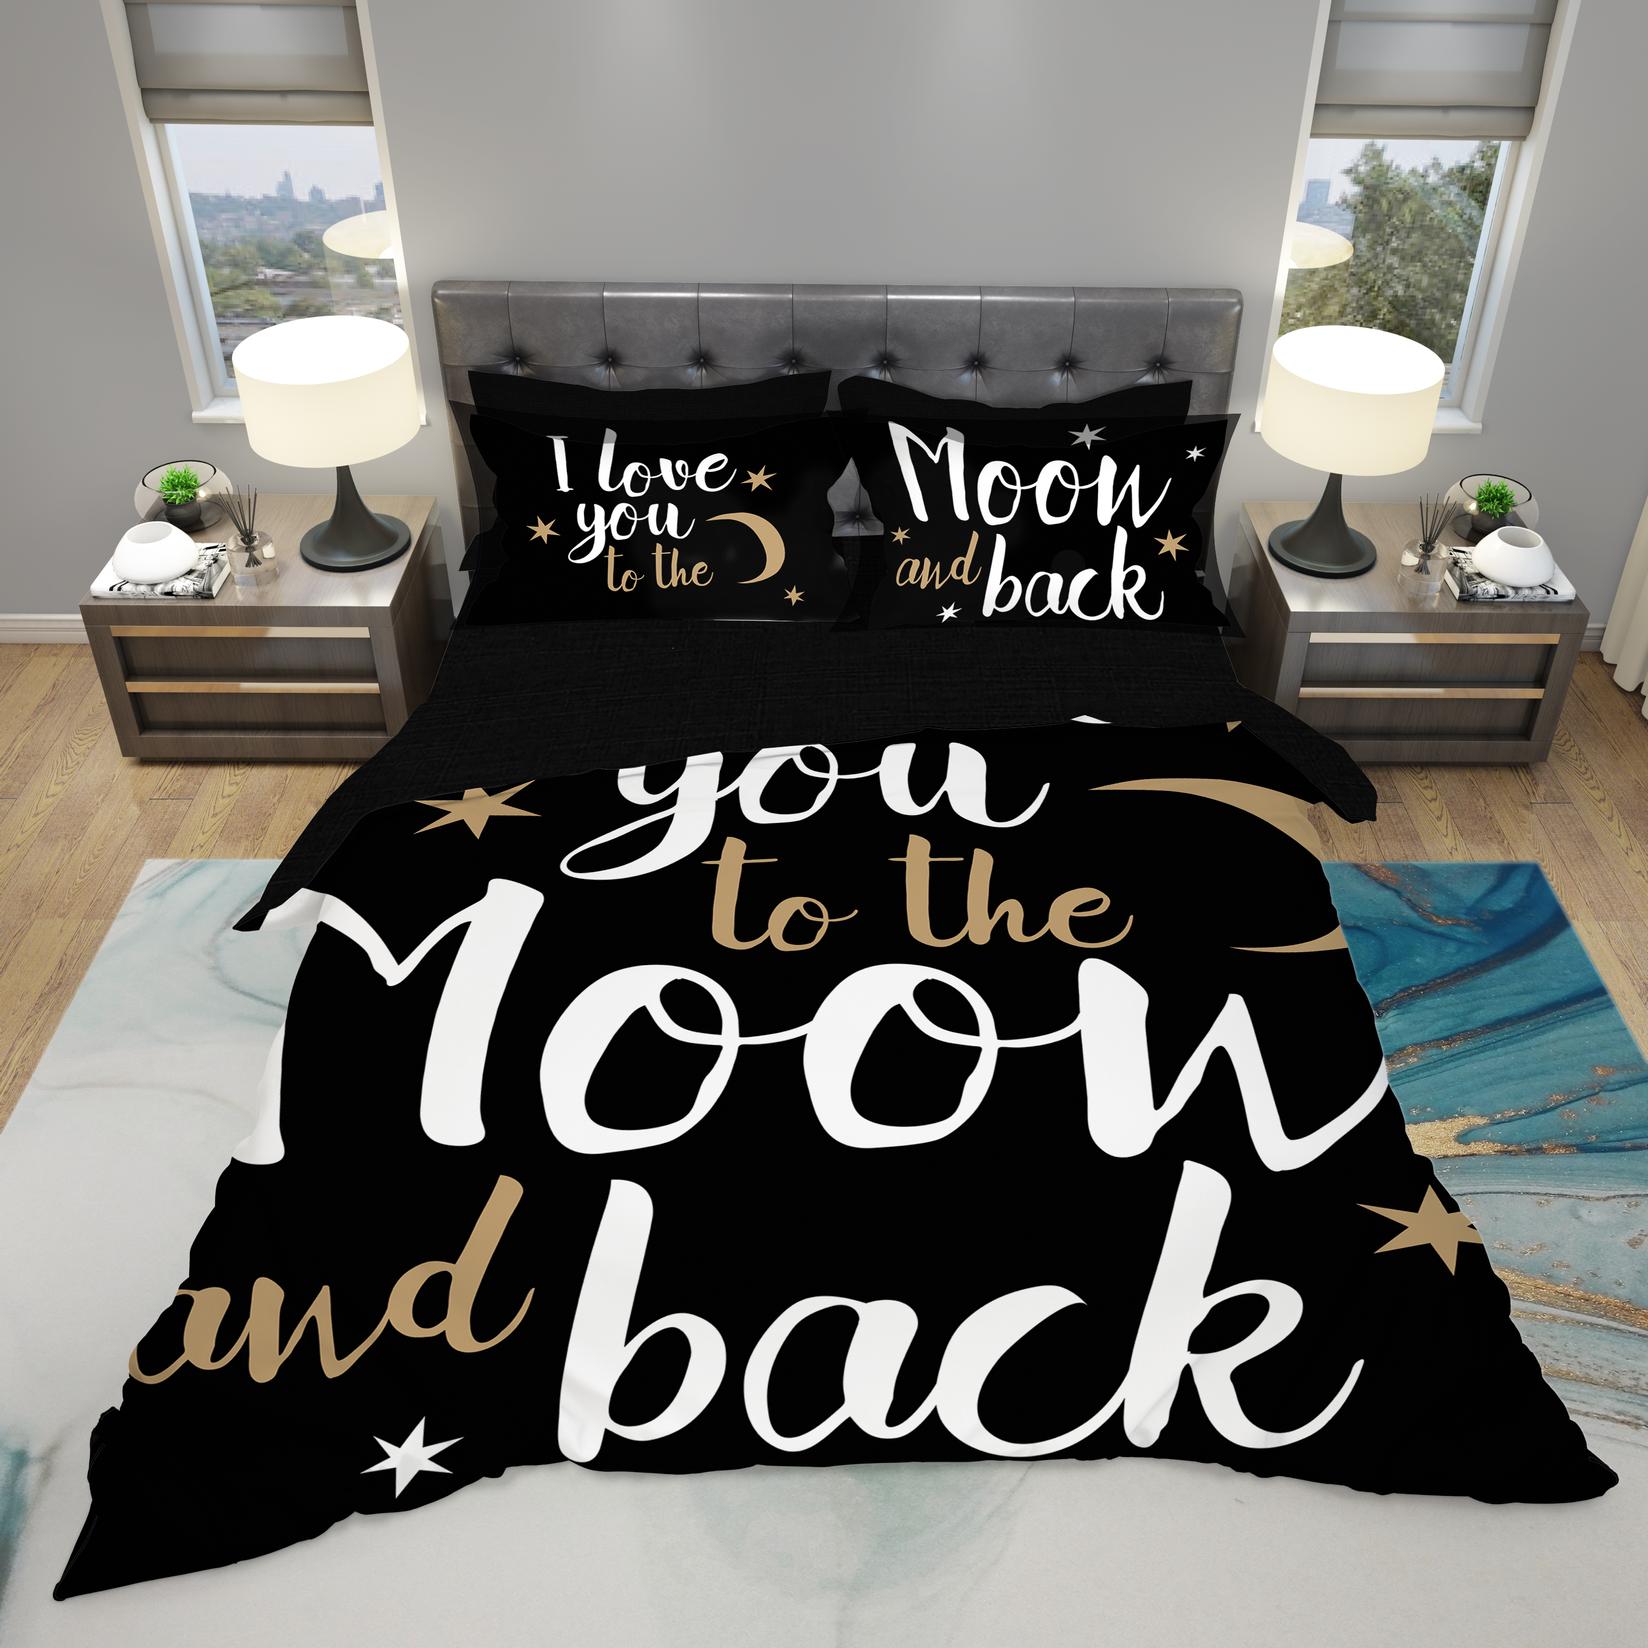 MEY HOME Posteljina I love you to the moon and back 3D 200x220cm crno-bela